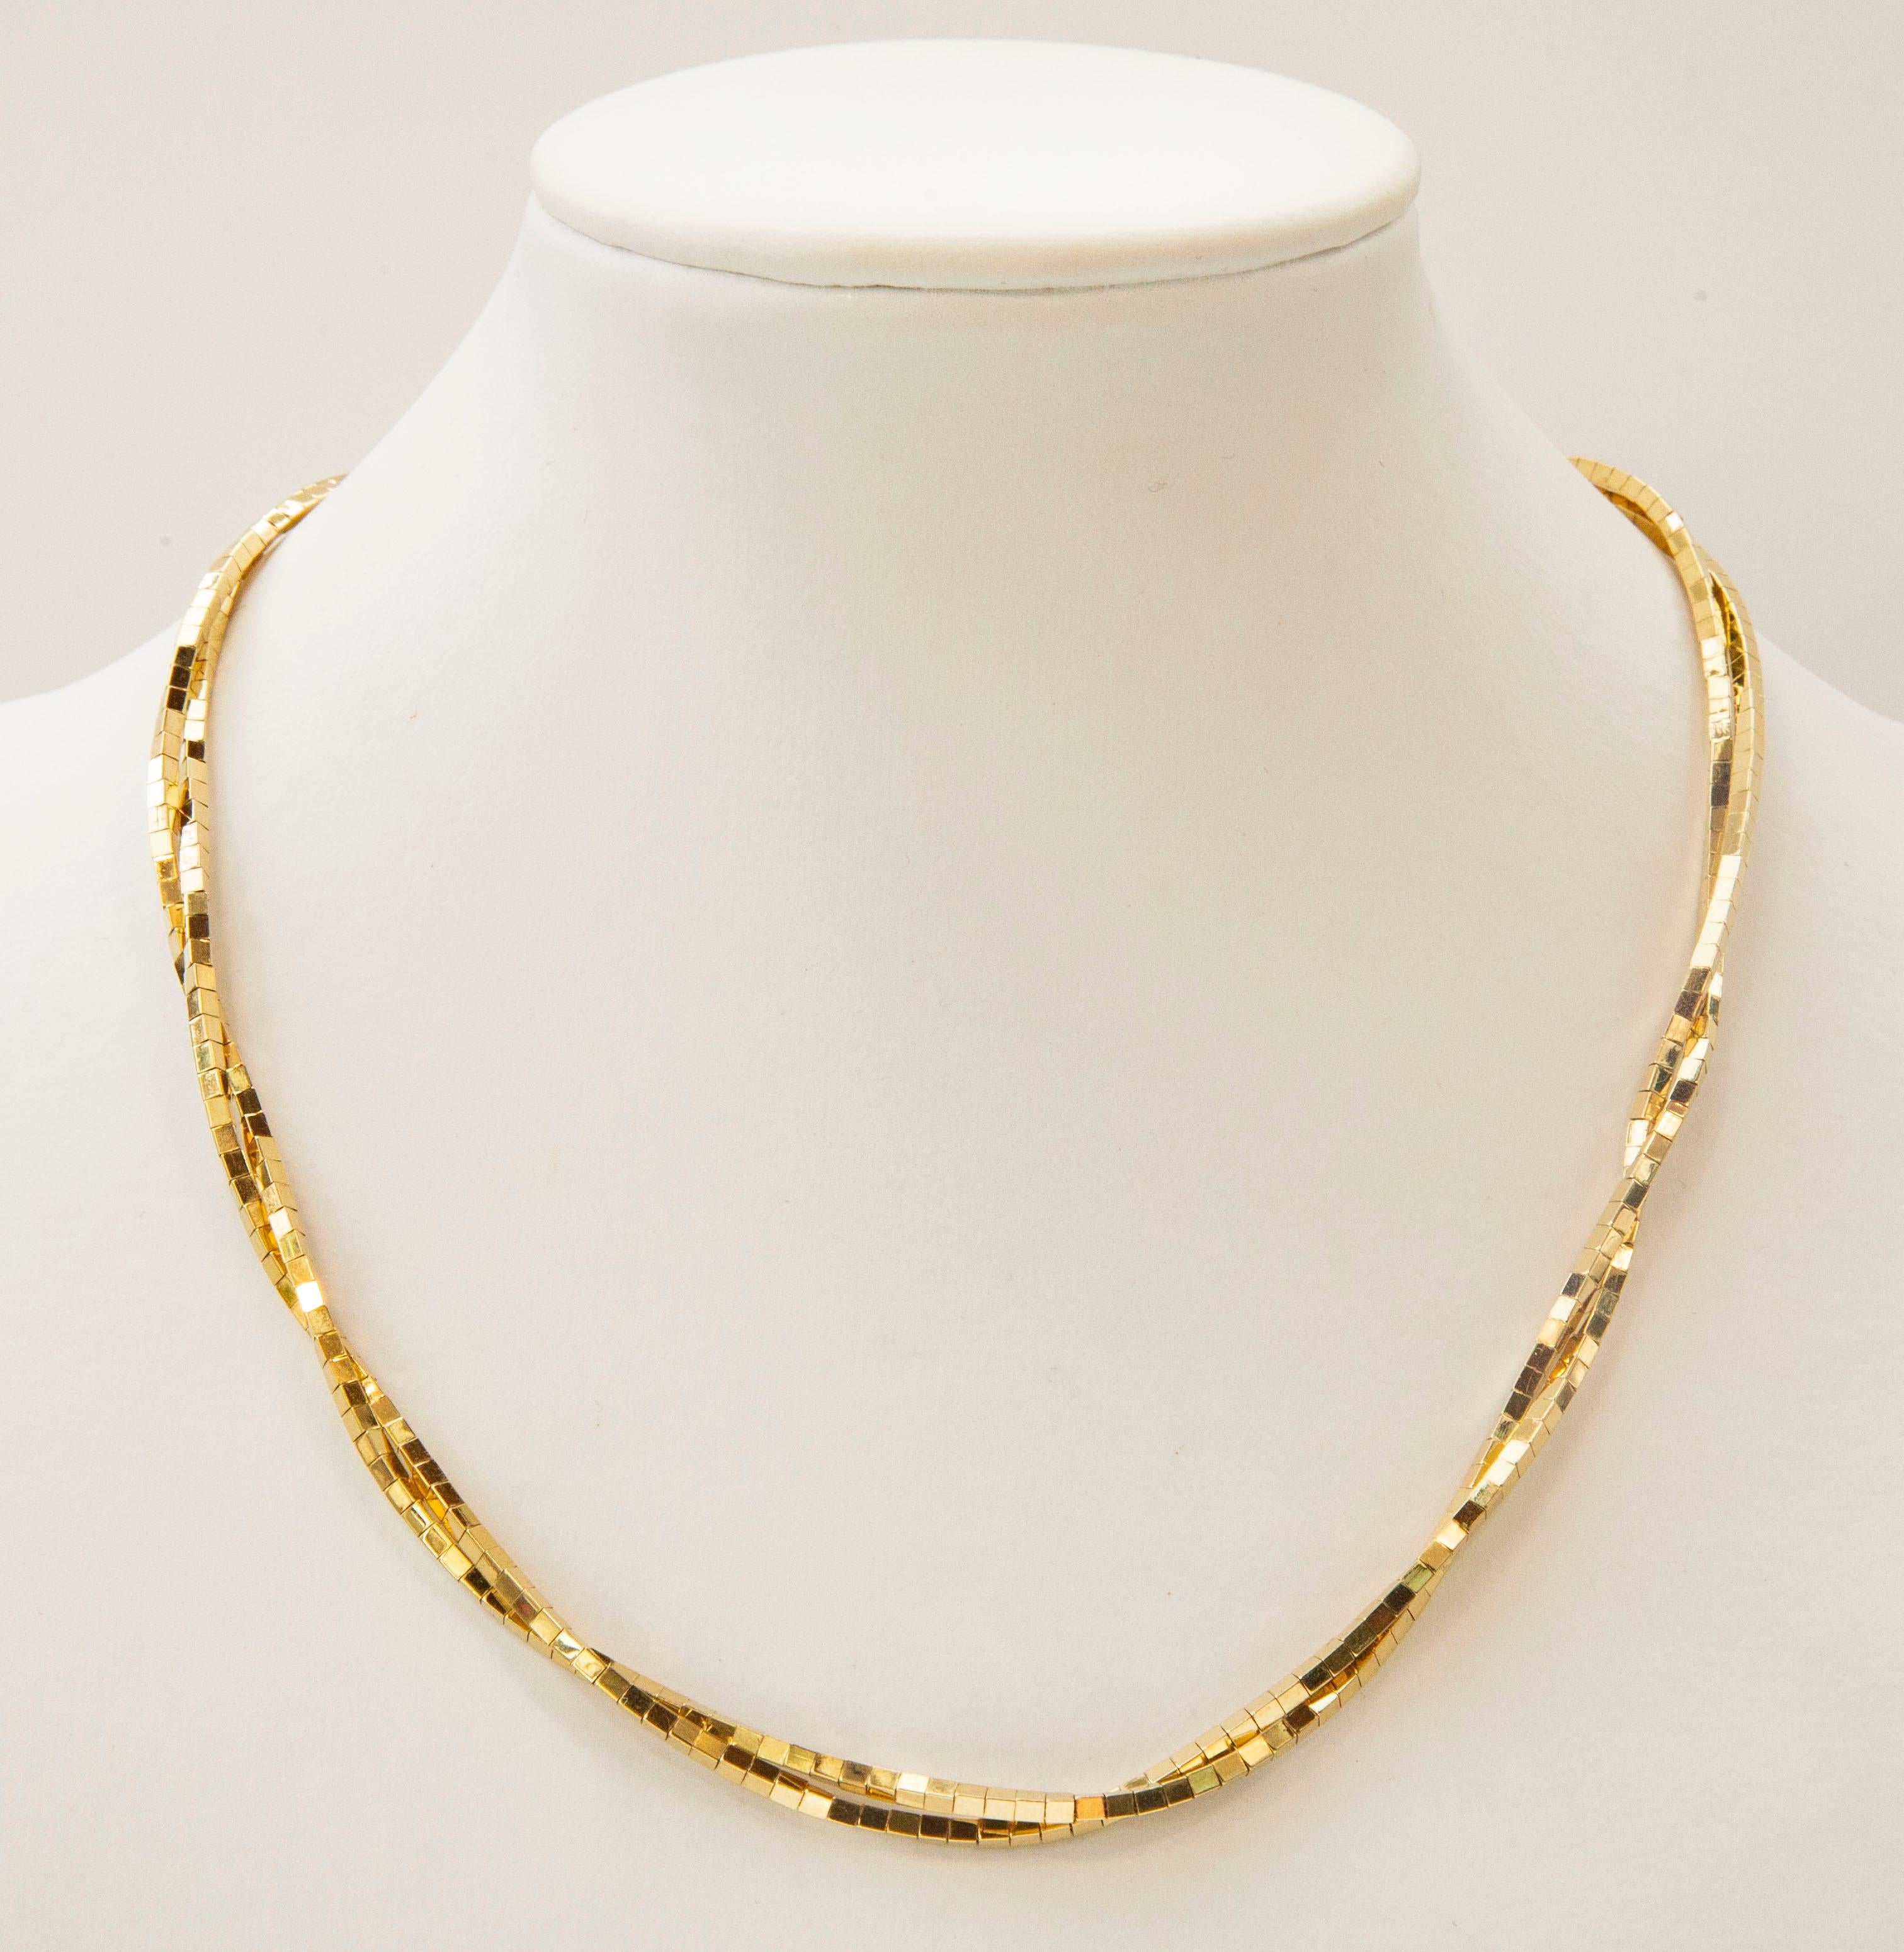 A vintage 14 karat solid yellow gold necklace. The necklace features golden bars in two twisted rows. The gold is shiny and has a moderate color of gold (i.e. not very vivid and dark gold color).  The style of the necklace is modern and quite